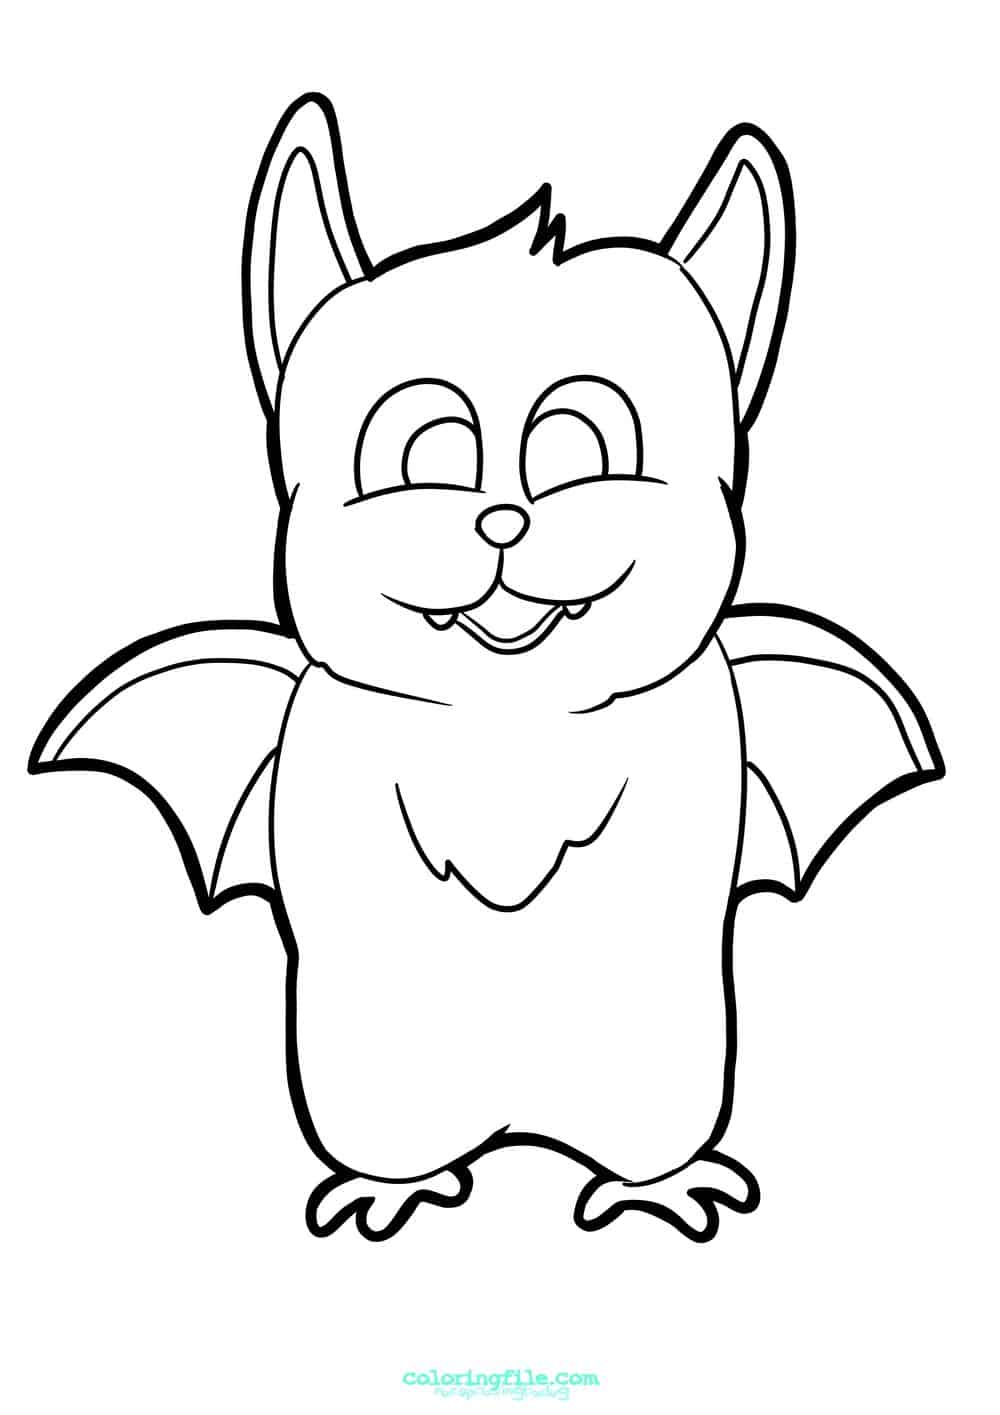 Printable halloween bat coloring pages